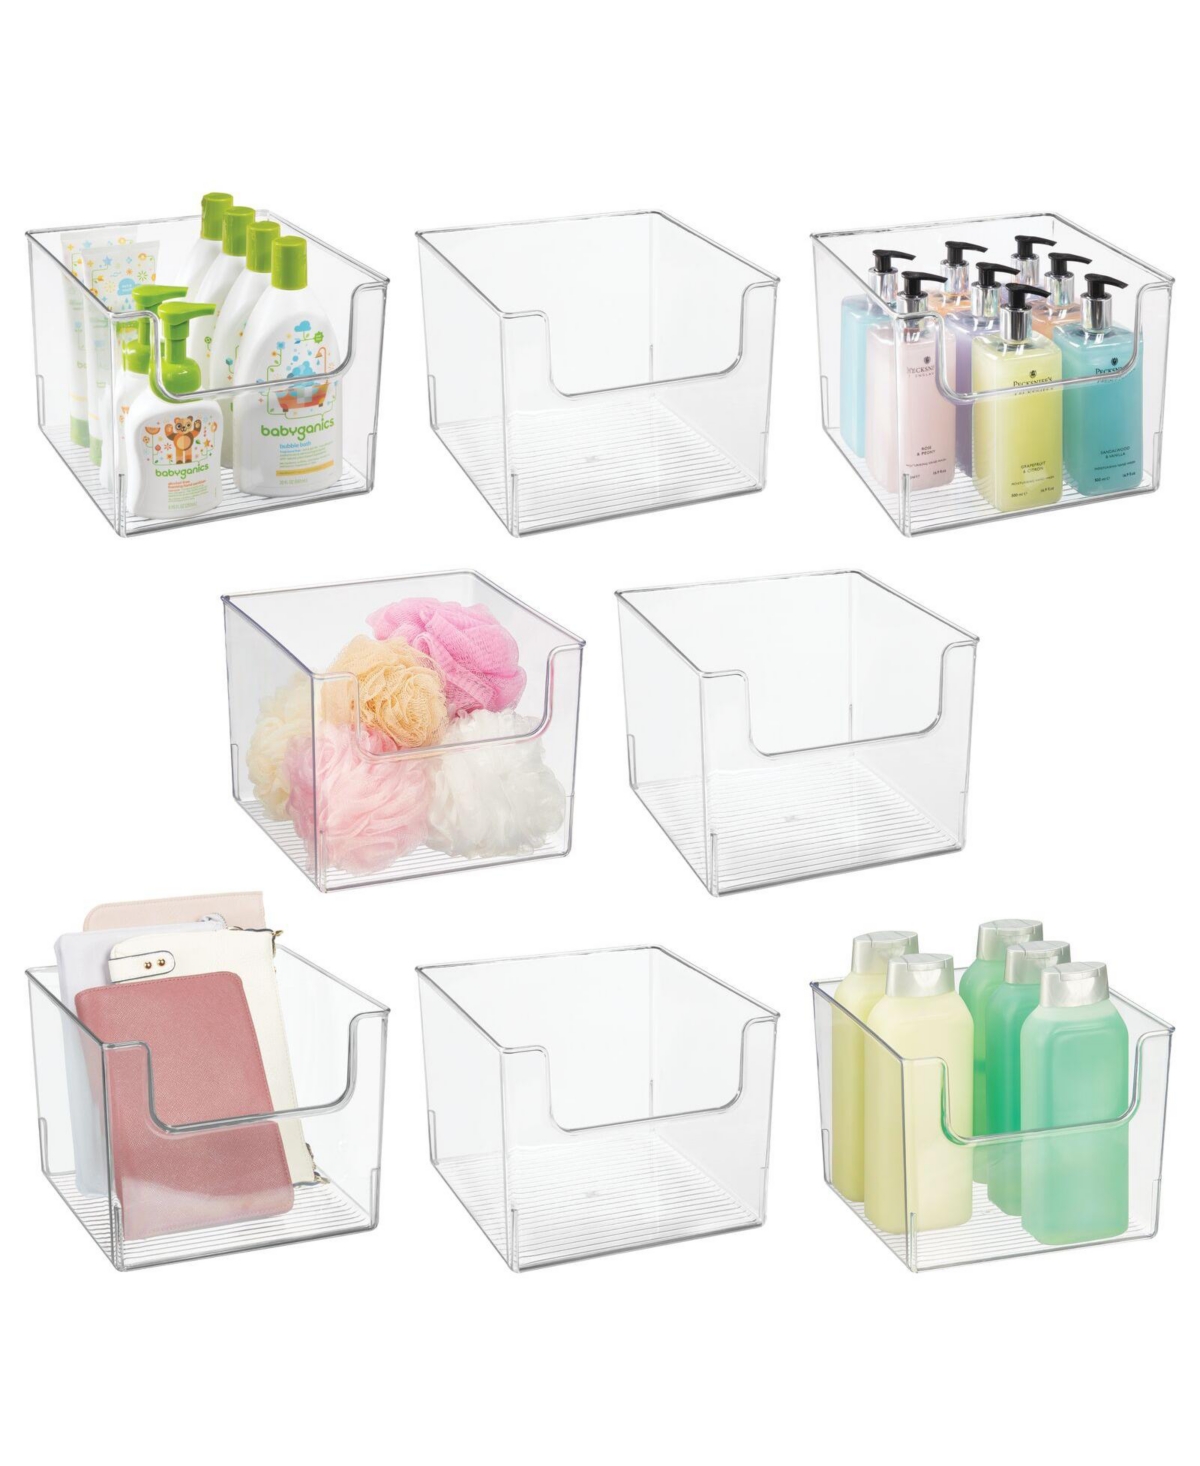 Plastic Bathroom Storage Organizer Bin with Open Front - 8 Pack - 10 x 10 x 8 - Clear